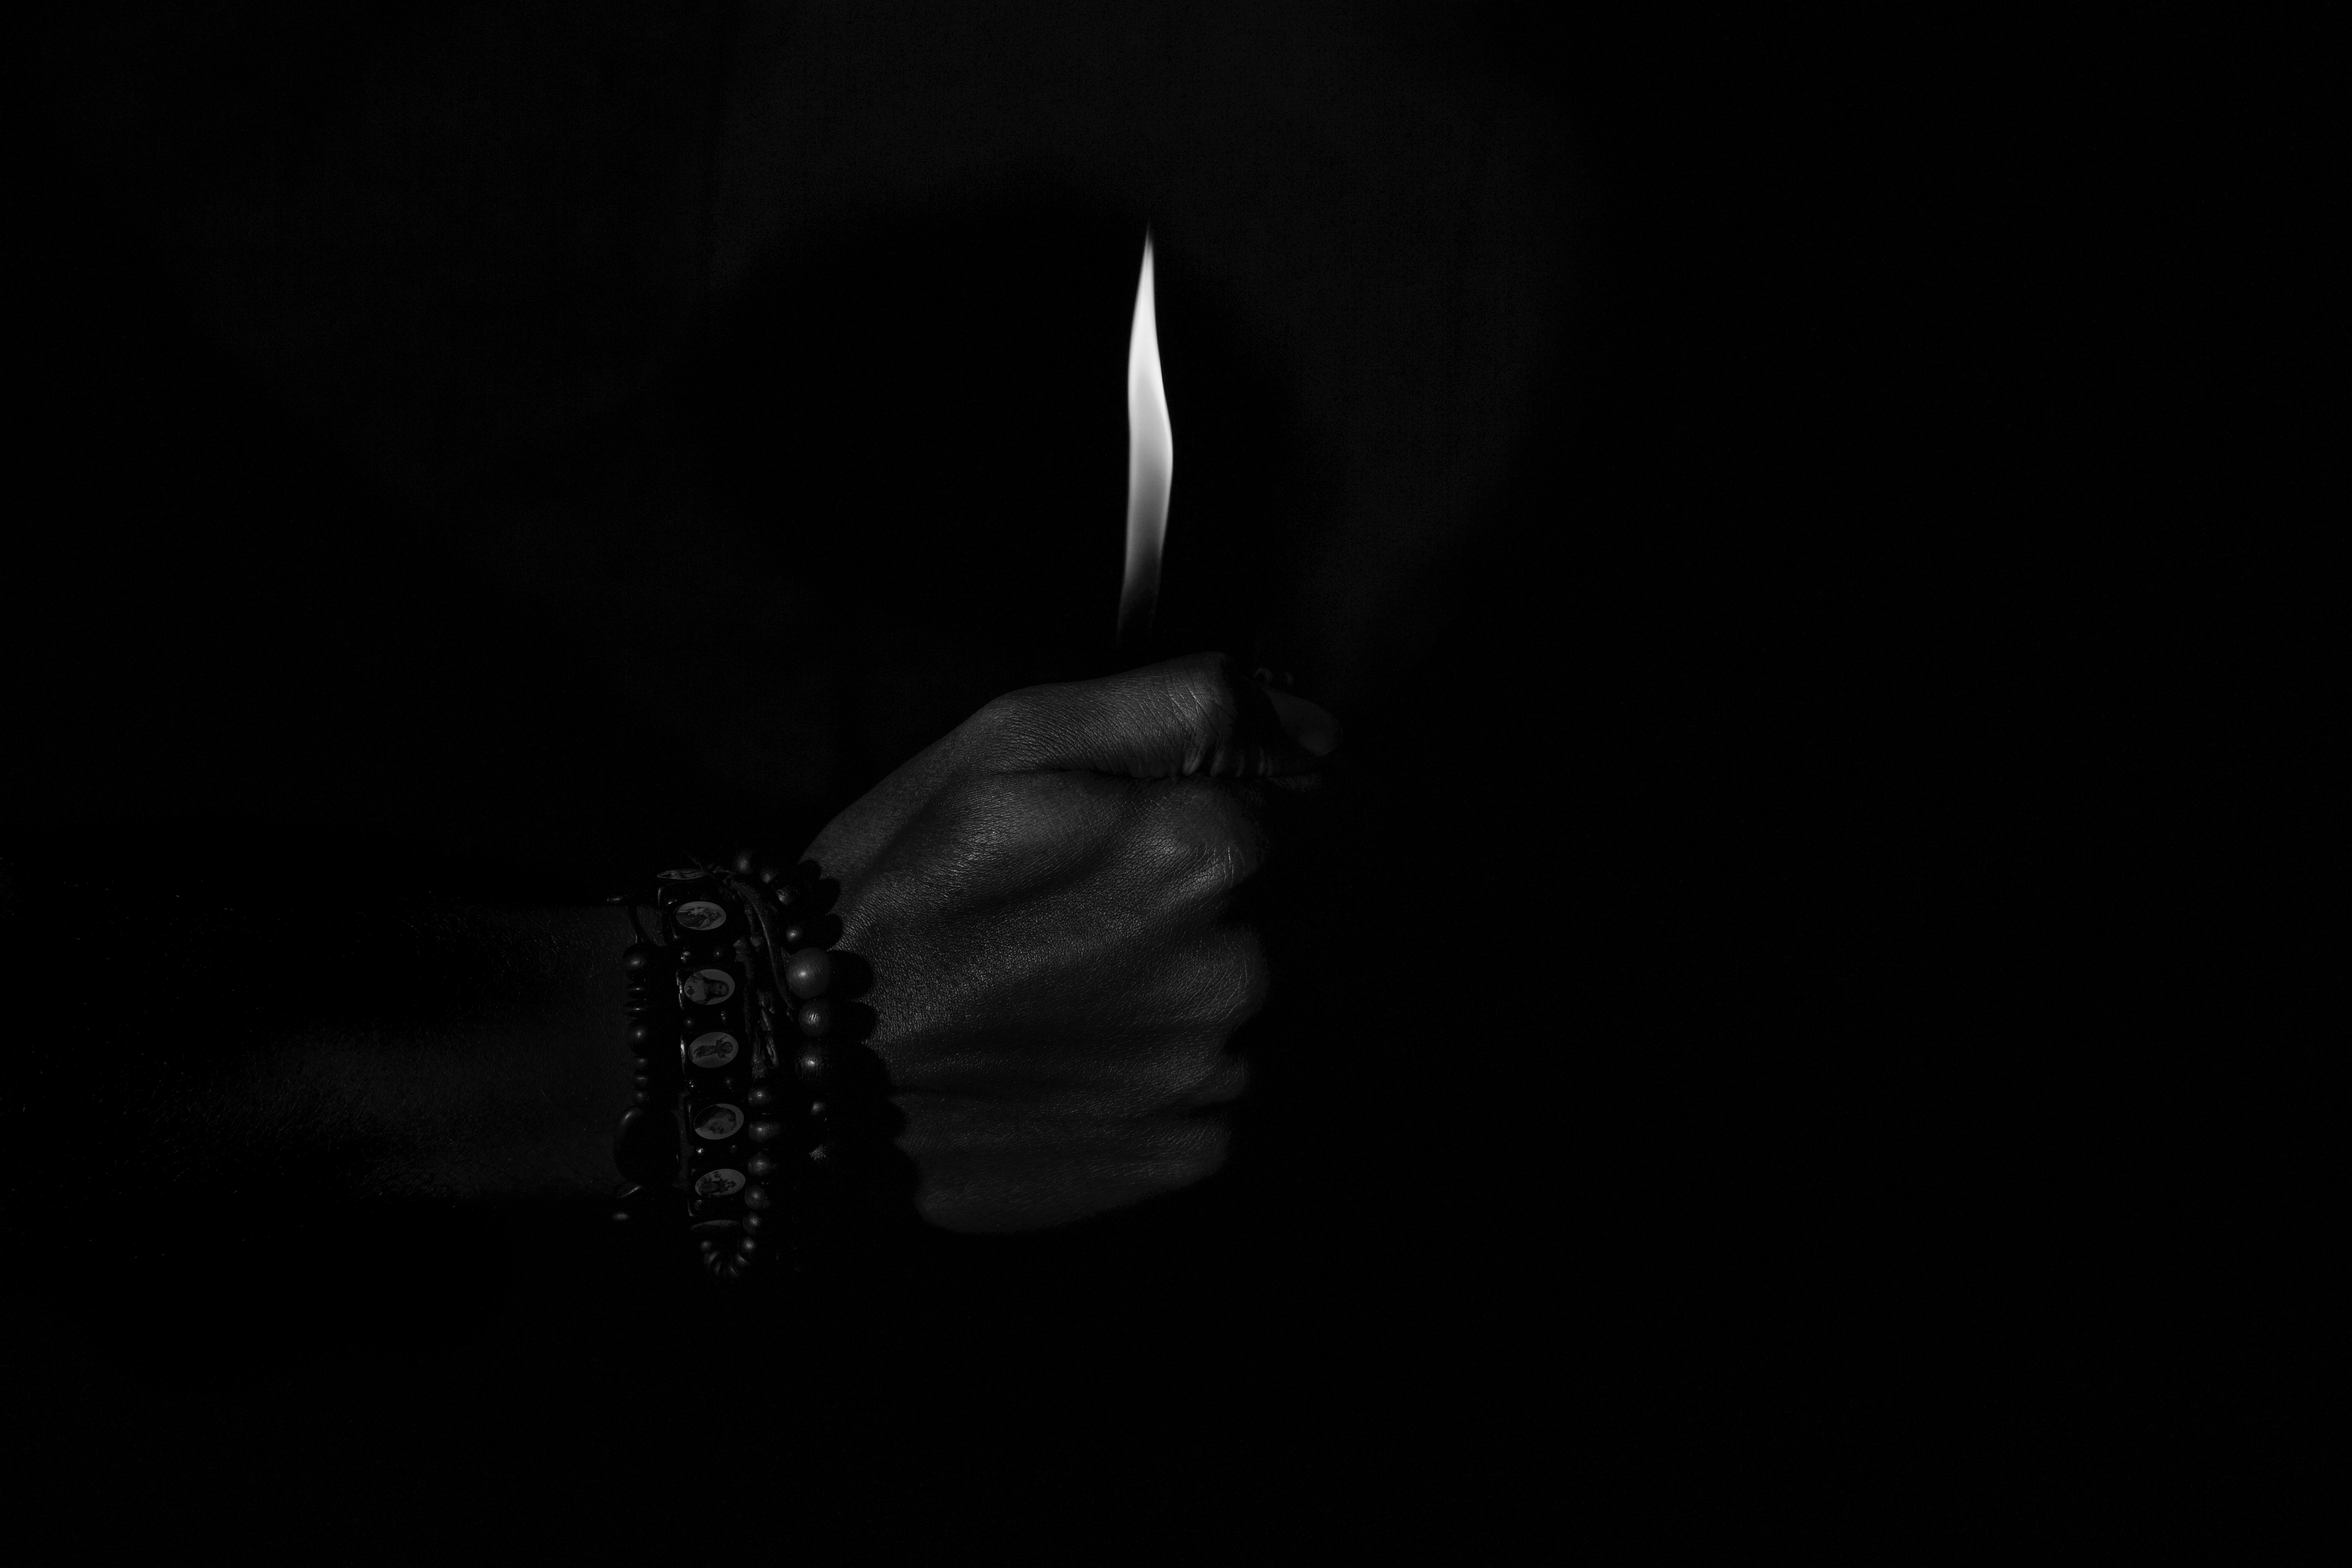 hands, chb, black, bw, candle images